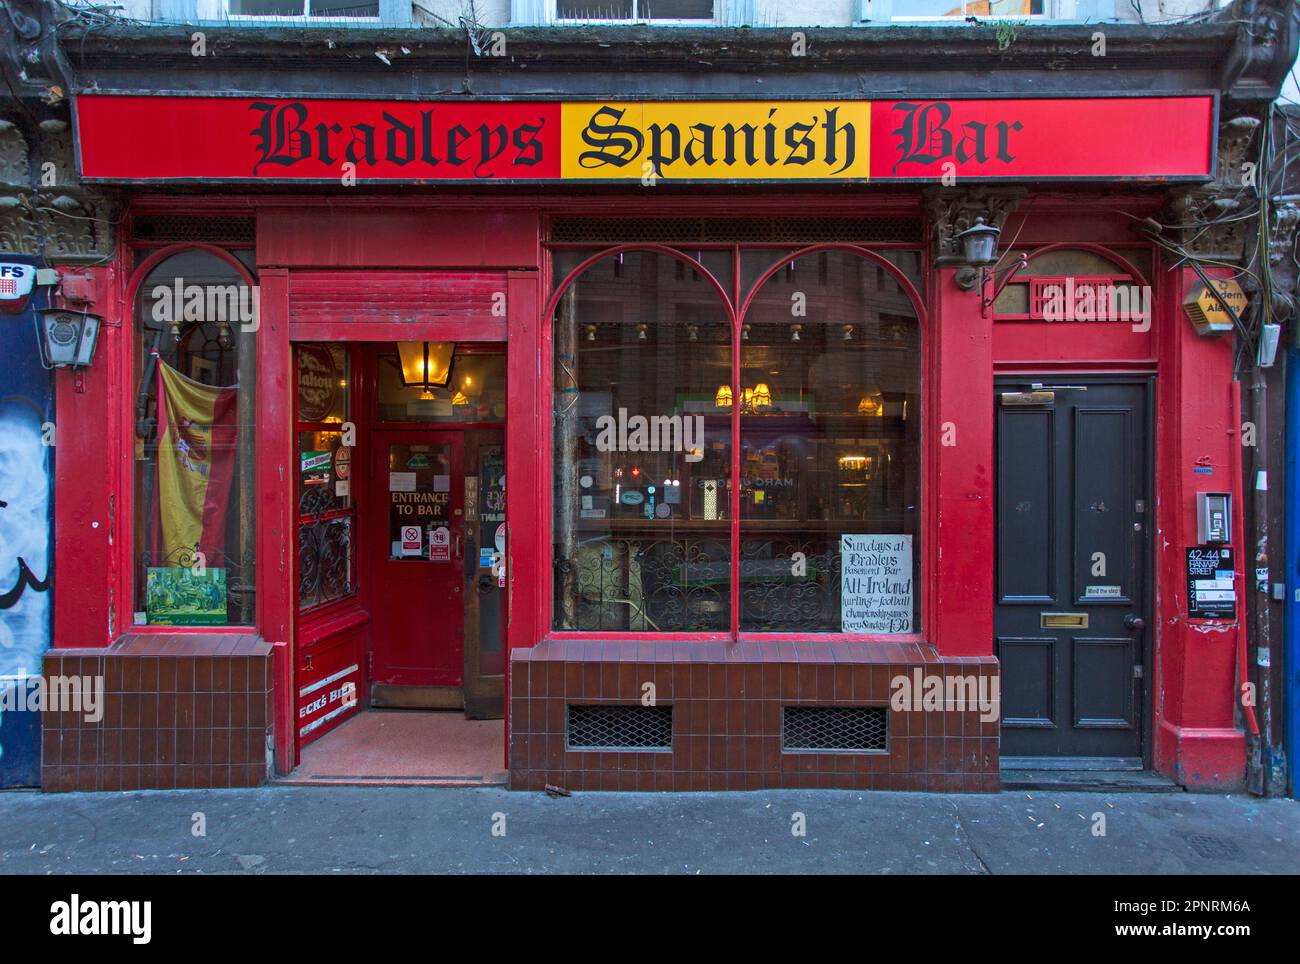 Bradley's Spanish Bar exterior on Hanway Street in Fitzrovia district of London, England Stock Photo